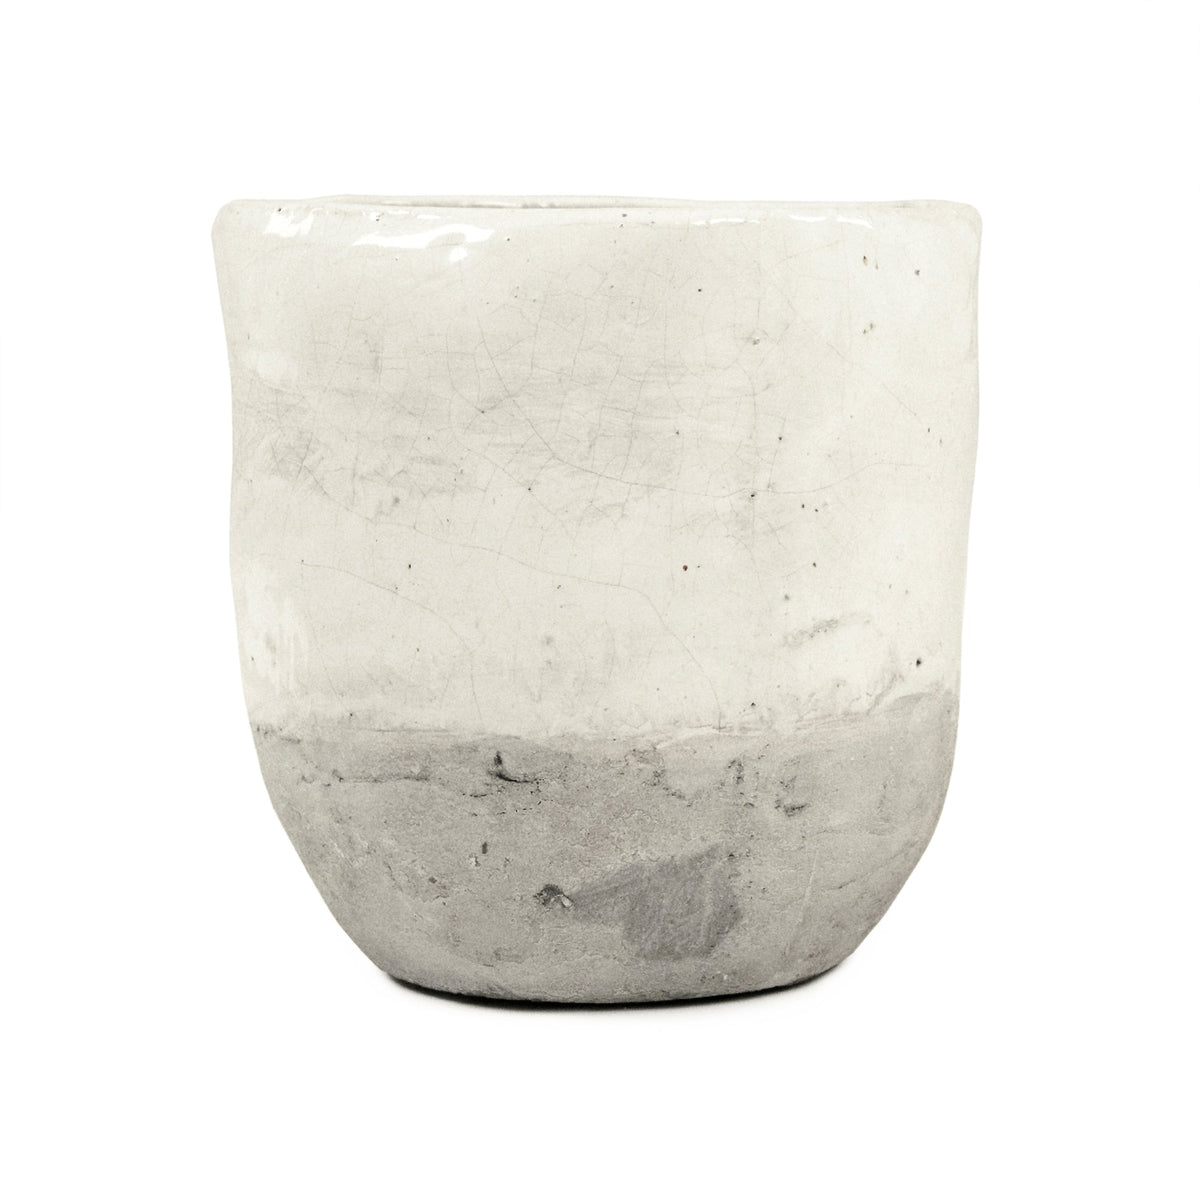 Distressed White Vase (7793L A25A) by Zentique